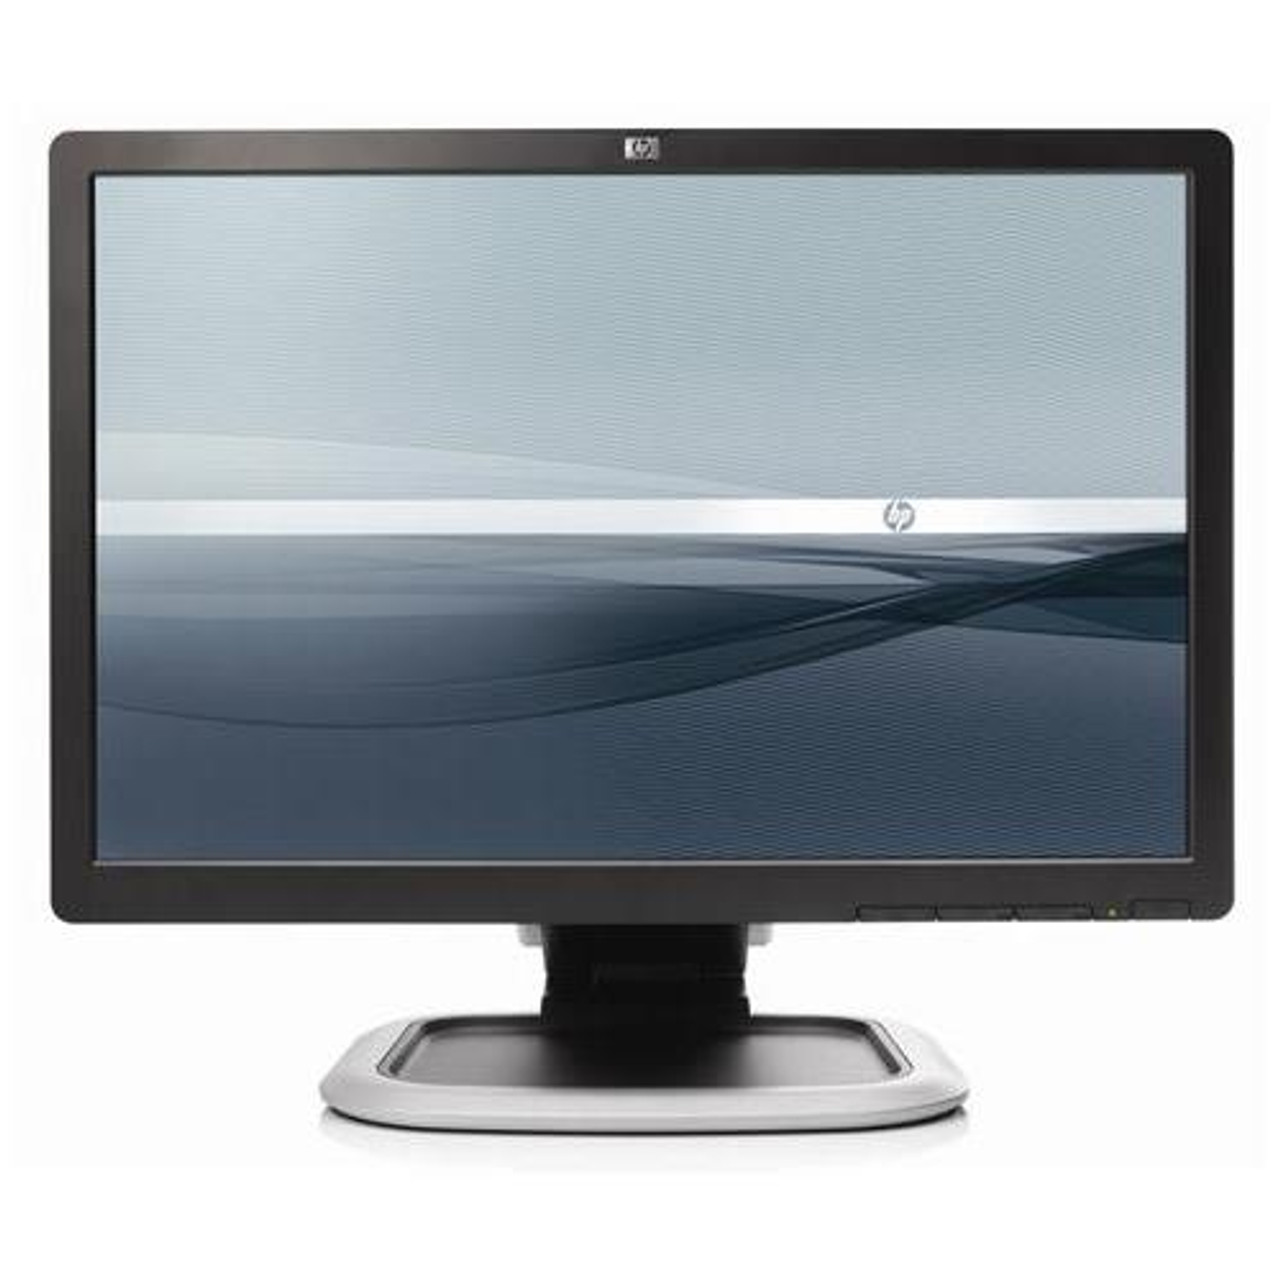 GM757-69101 - HP W2207h 22.0-inch Widescreen TFT Active Matrix 1680x1050/60 Hz Color LCD Flat Panel Display Monitor